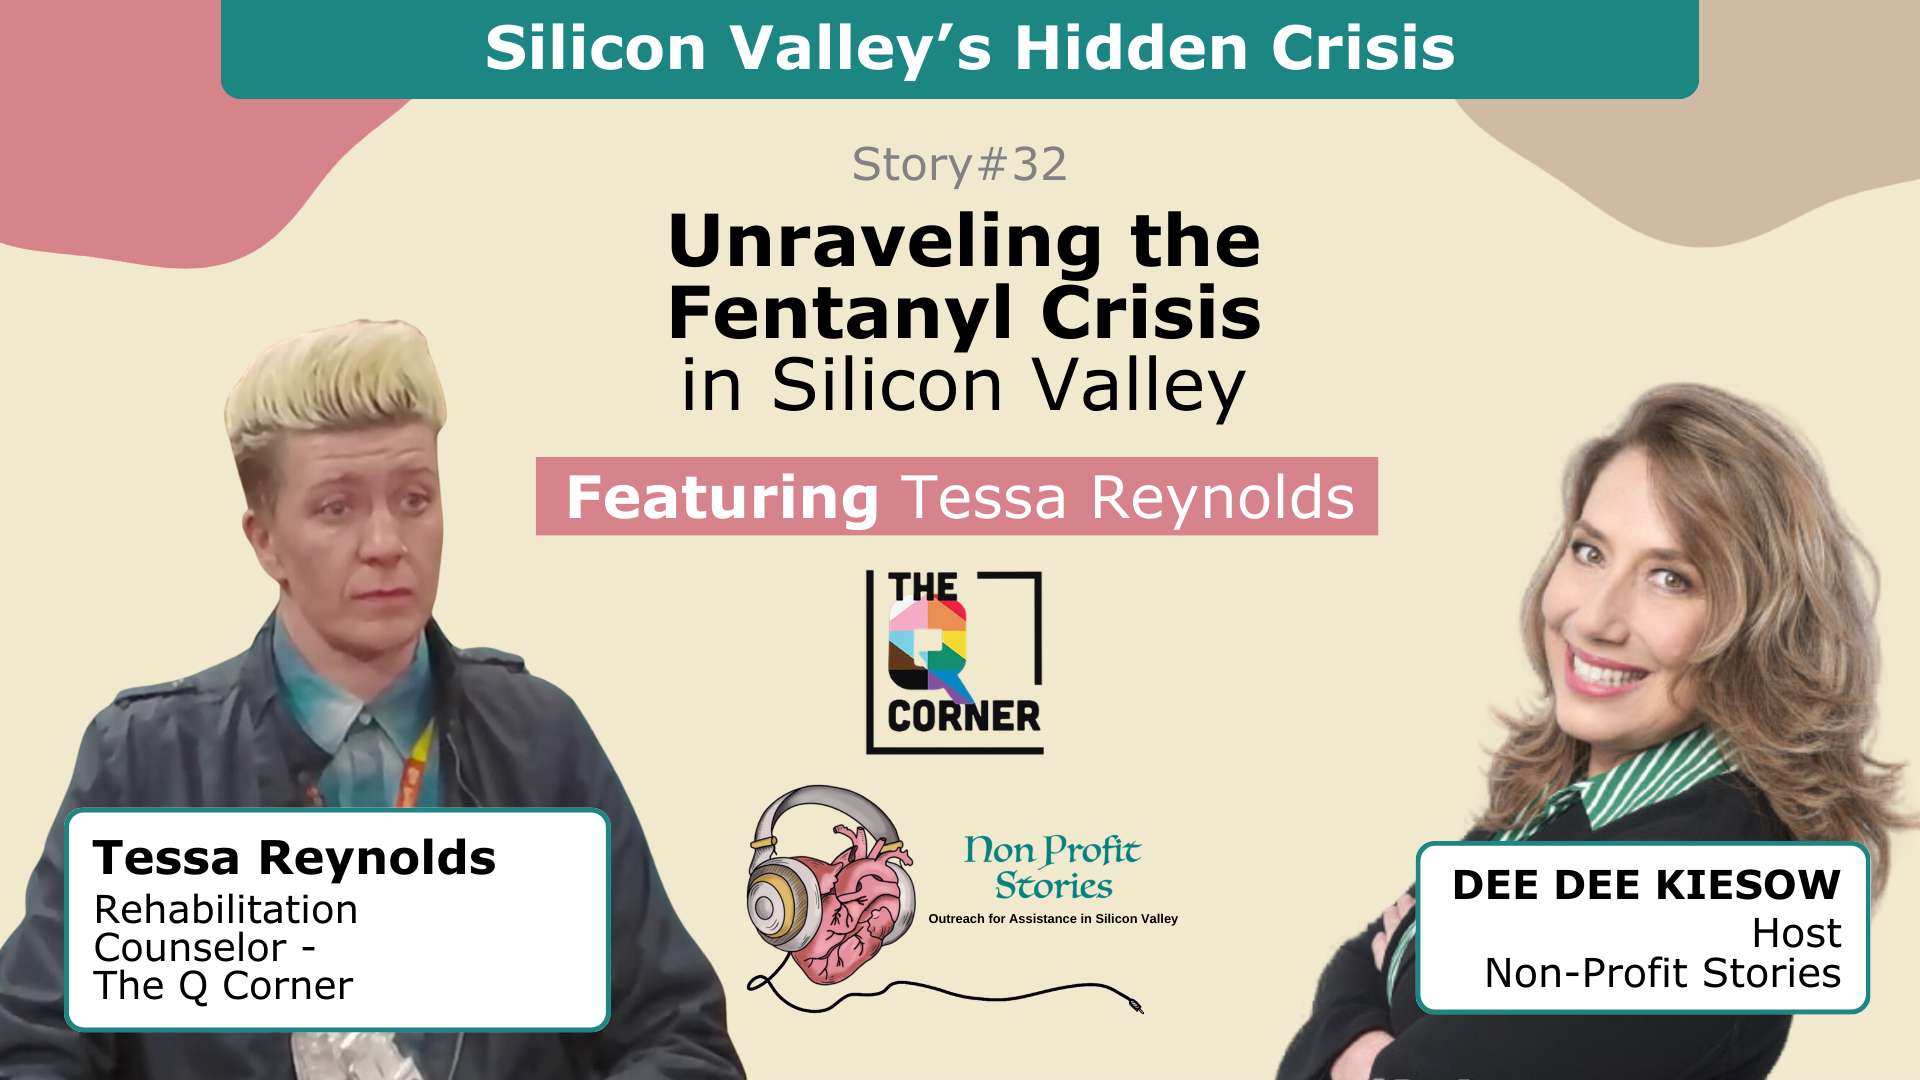 Unraveling the Fentanyl Crisis: Silicon Valley’s Hidden Crisis Video